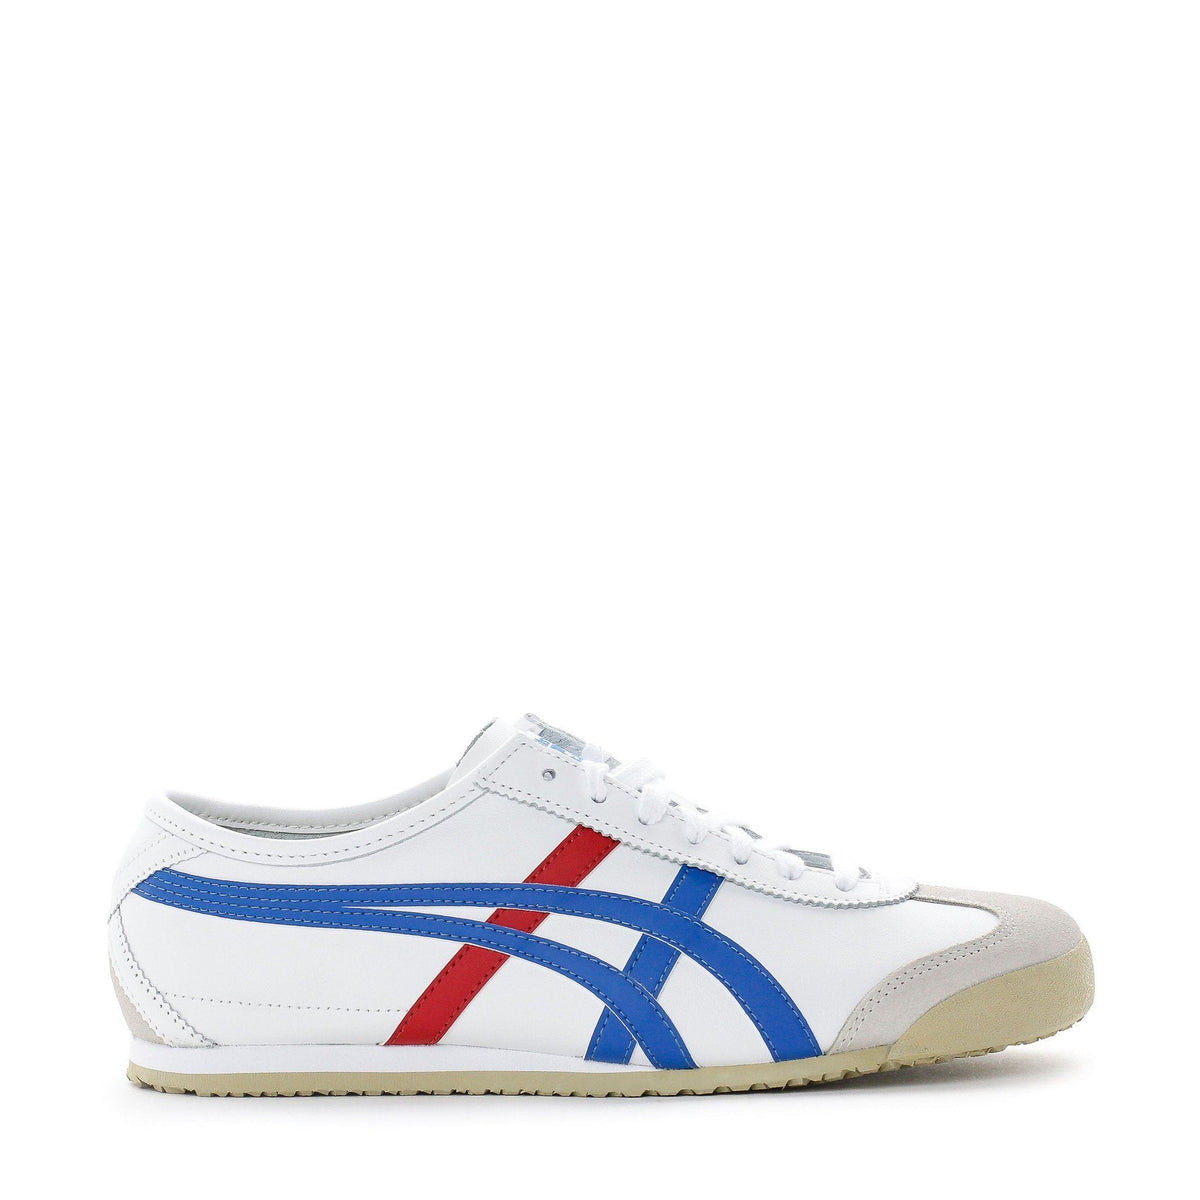 sneakersy asics onitsuka tiger mexico 66 dl408 white/blue 0146